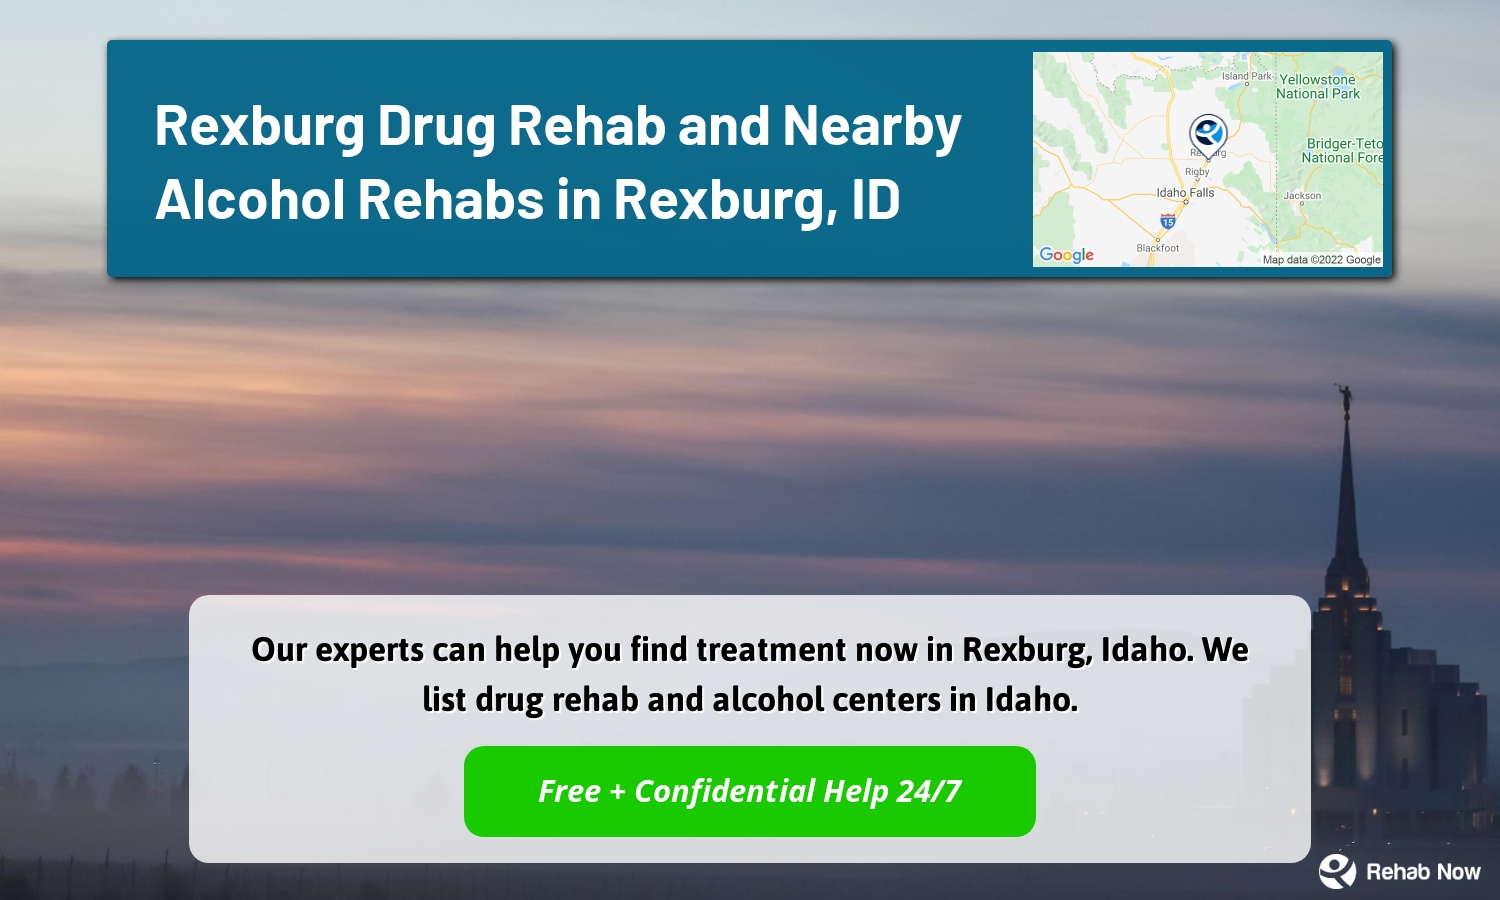 Our experts can help you find treatment now in Rexburg, Idaho. We list drug rehab and alcohol centers in Idaho.